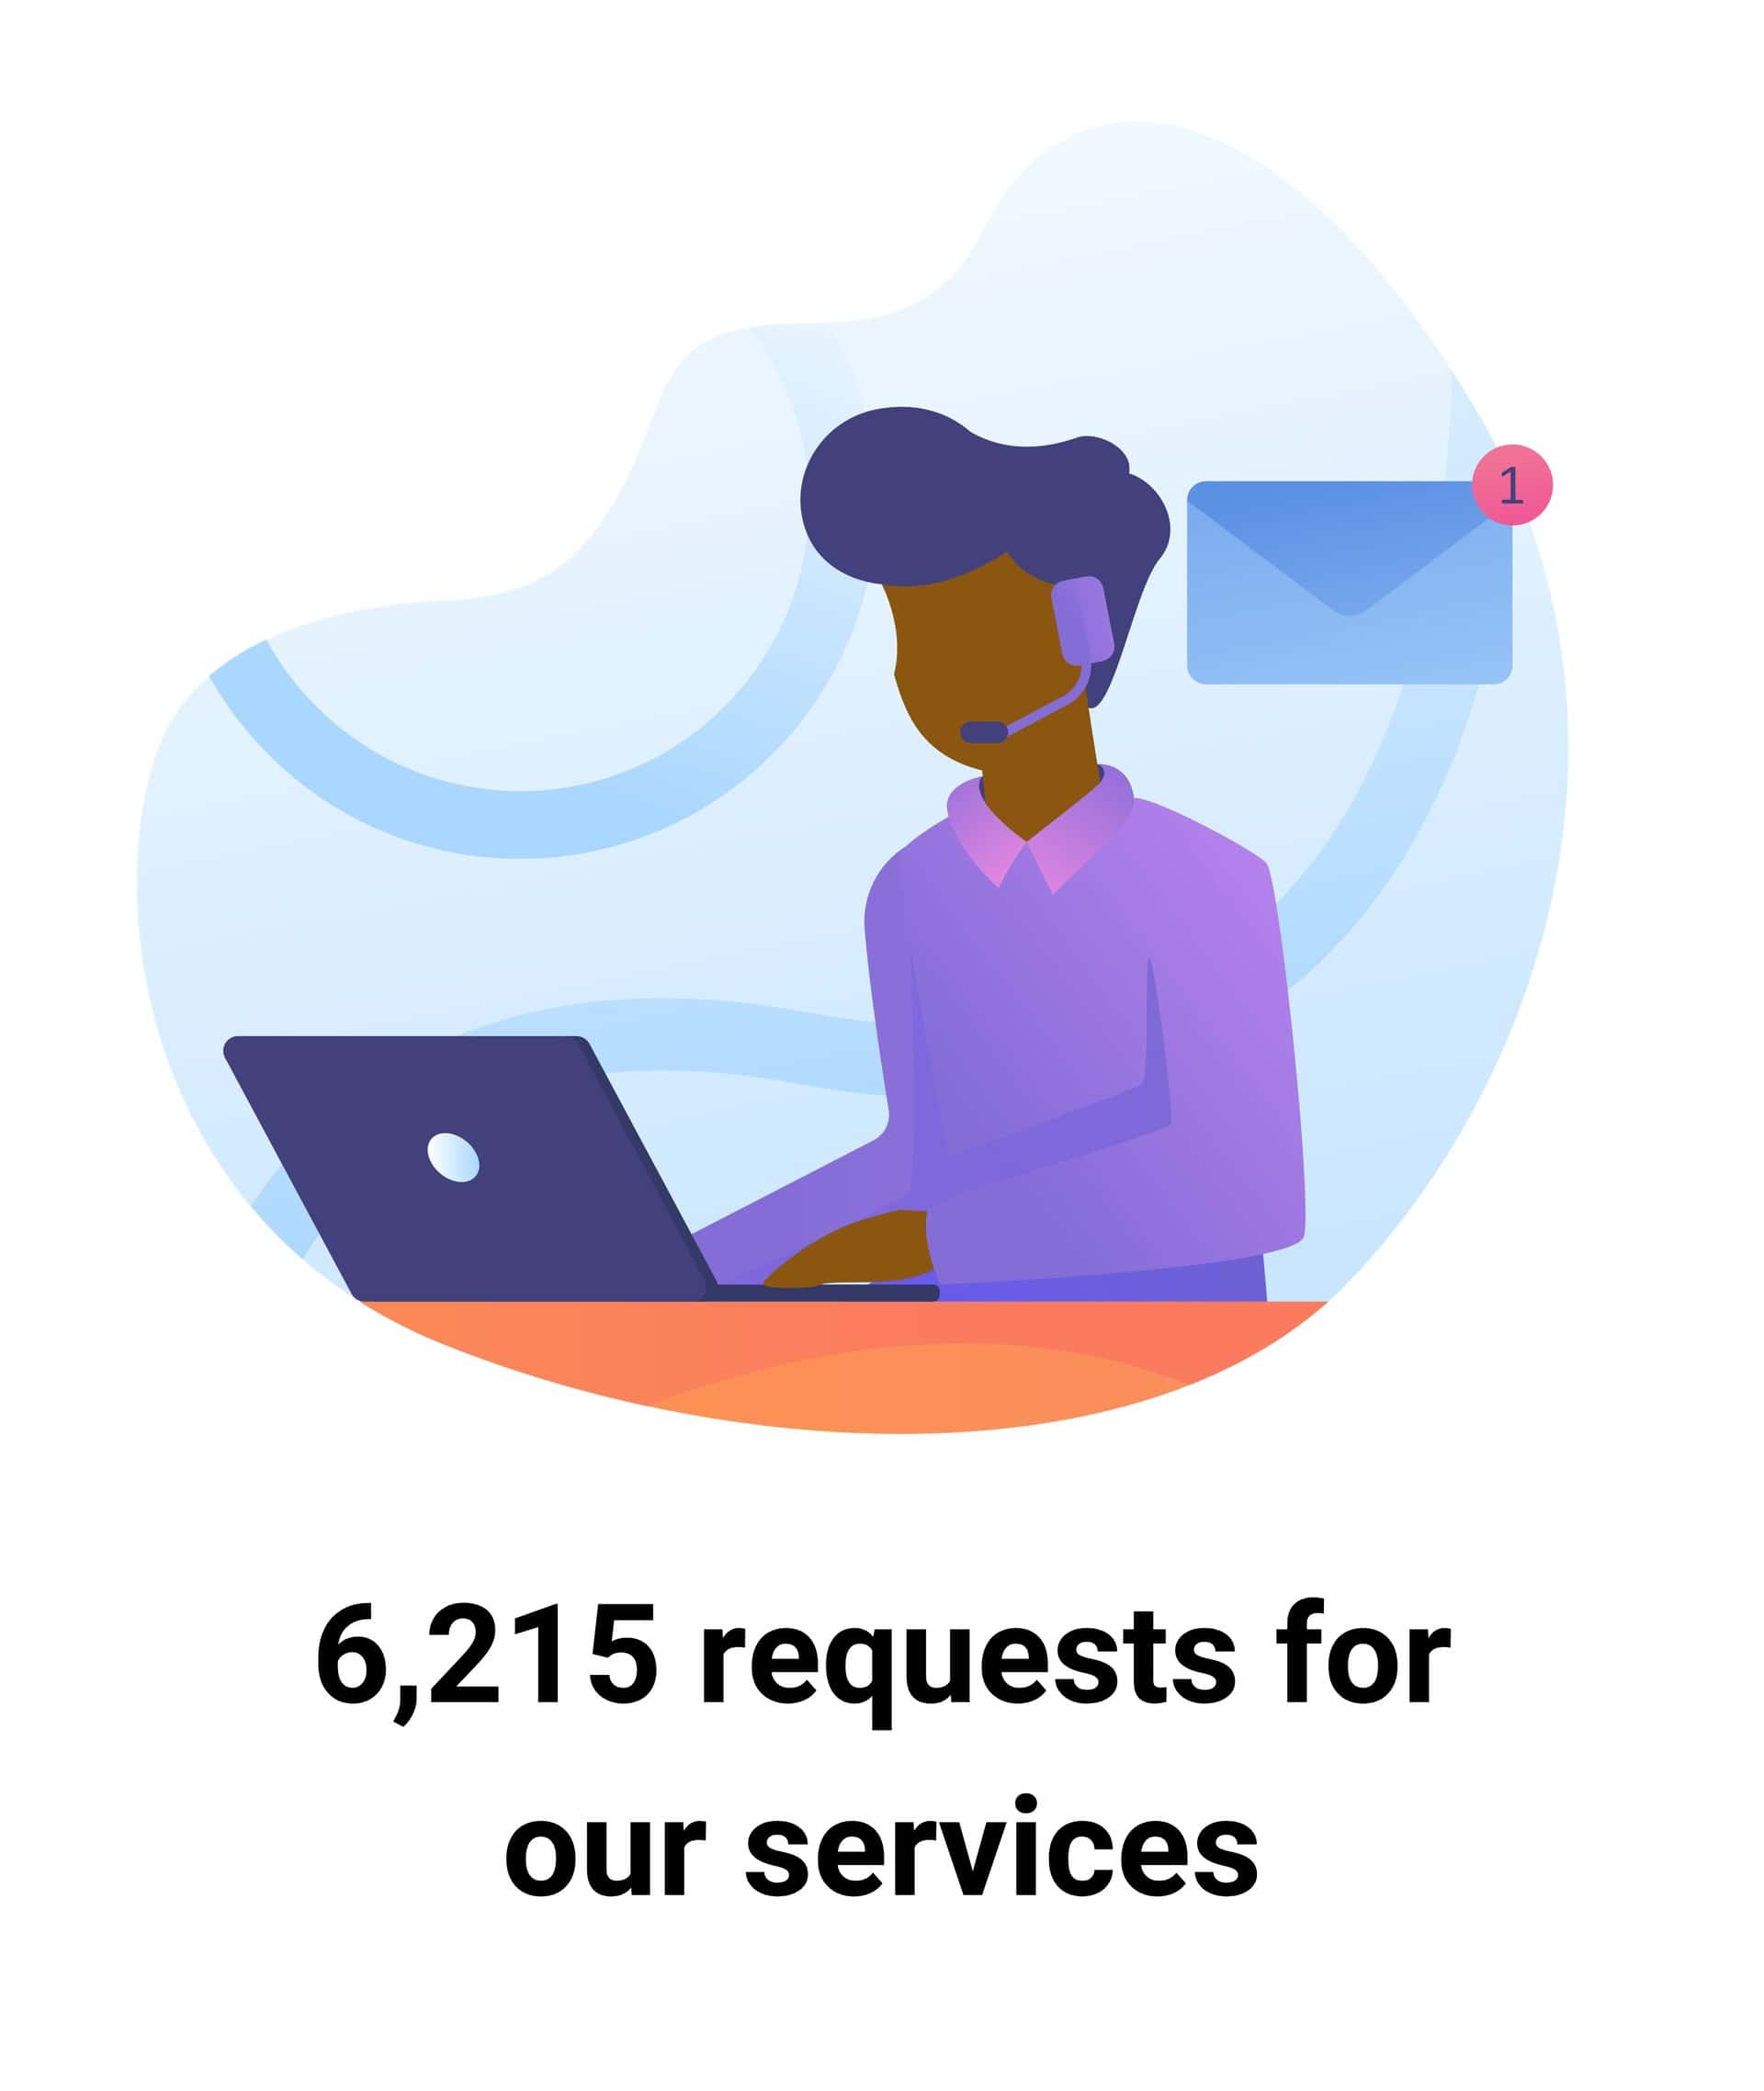 A person working at a call center. 6,215 requests for our services.